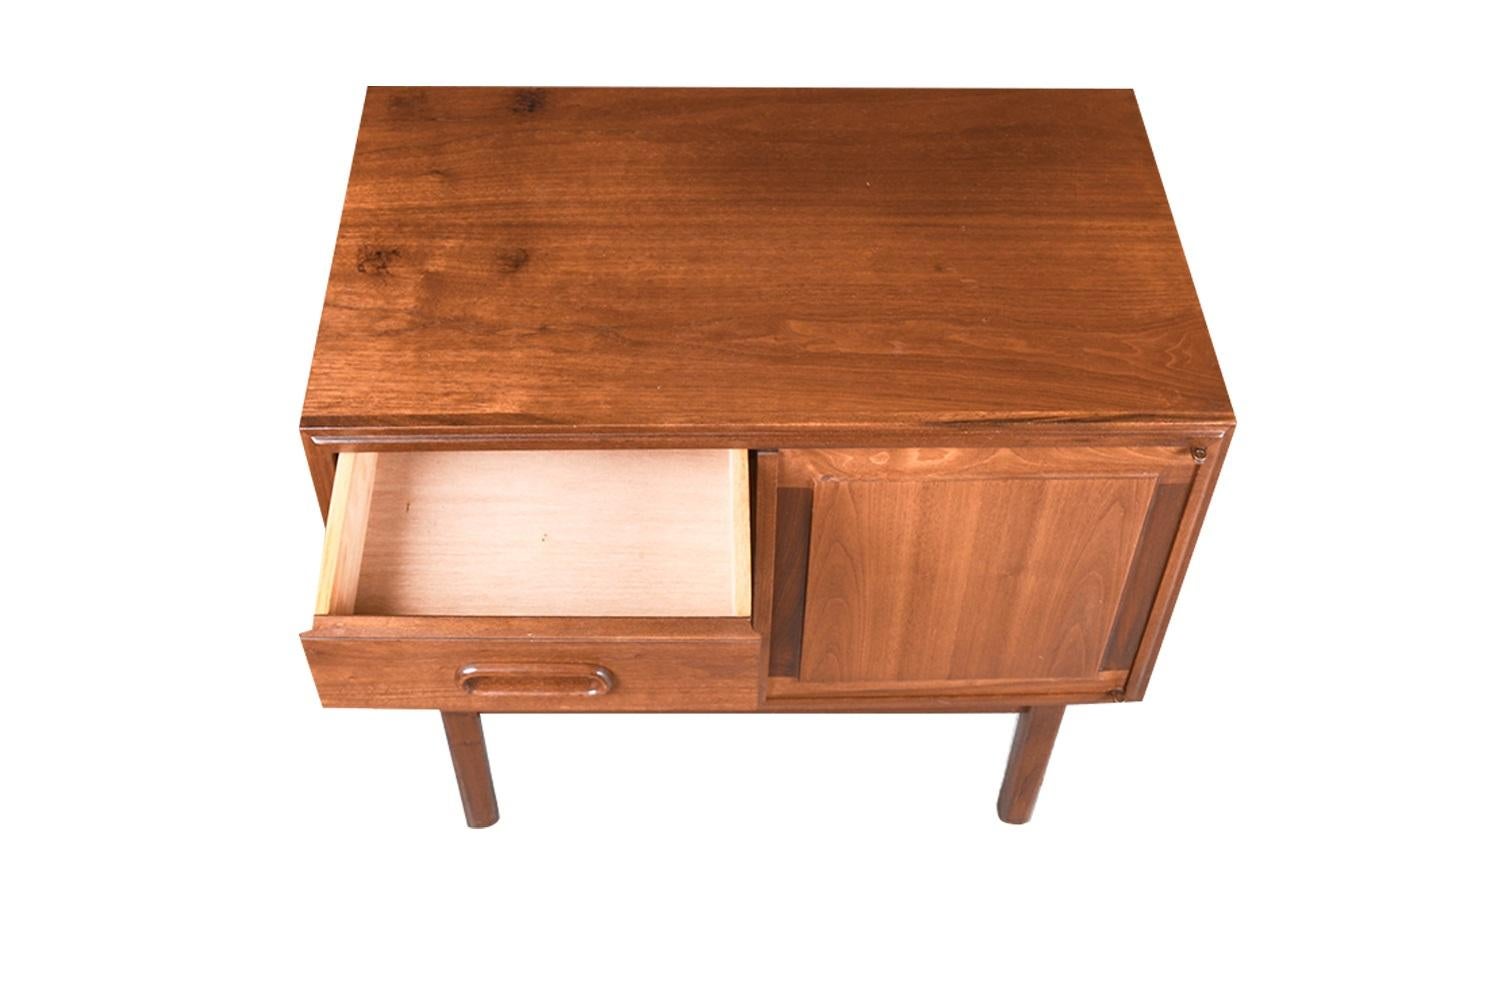 A remarkable mid-century nightstand/side table designed by Jack Cartwright for Founders Furniture Company in nearly pristine condition. Exceptional construction and style, with a fully finished back, the finished back side makes this nightstand